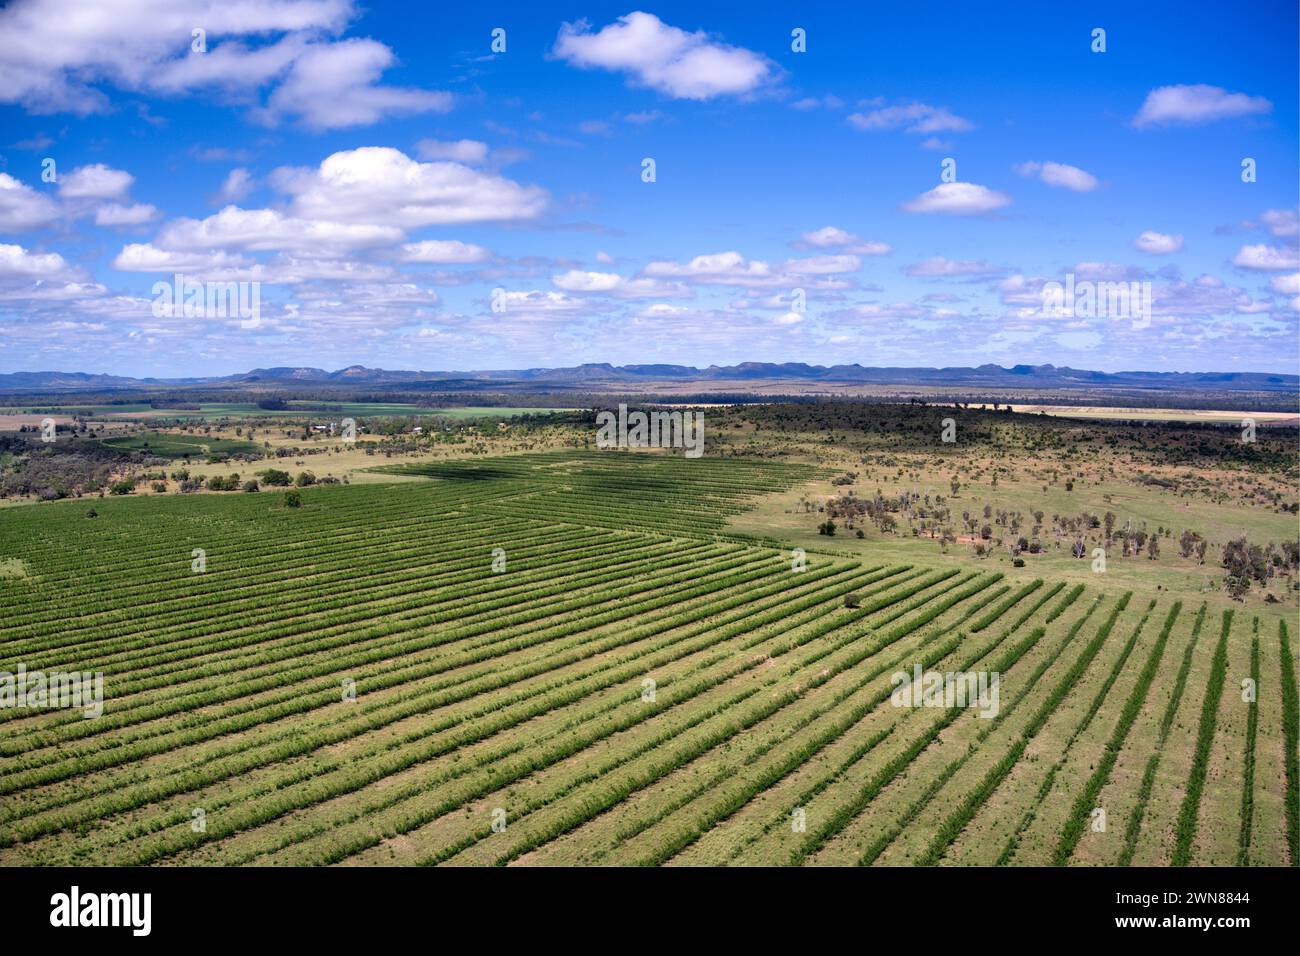 Vertical farming practices on irrigation farmland from the Dawson River for cattle grazing near Cracow Queensland Australia Stock Photo